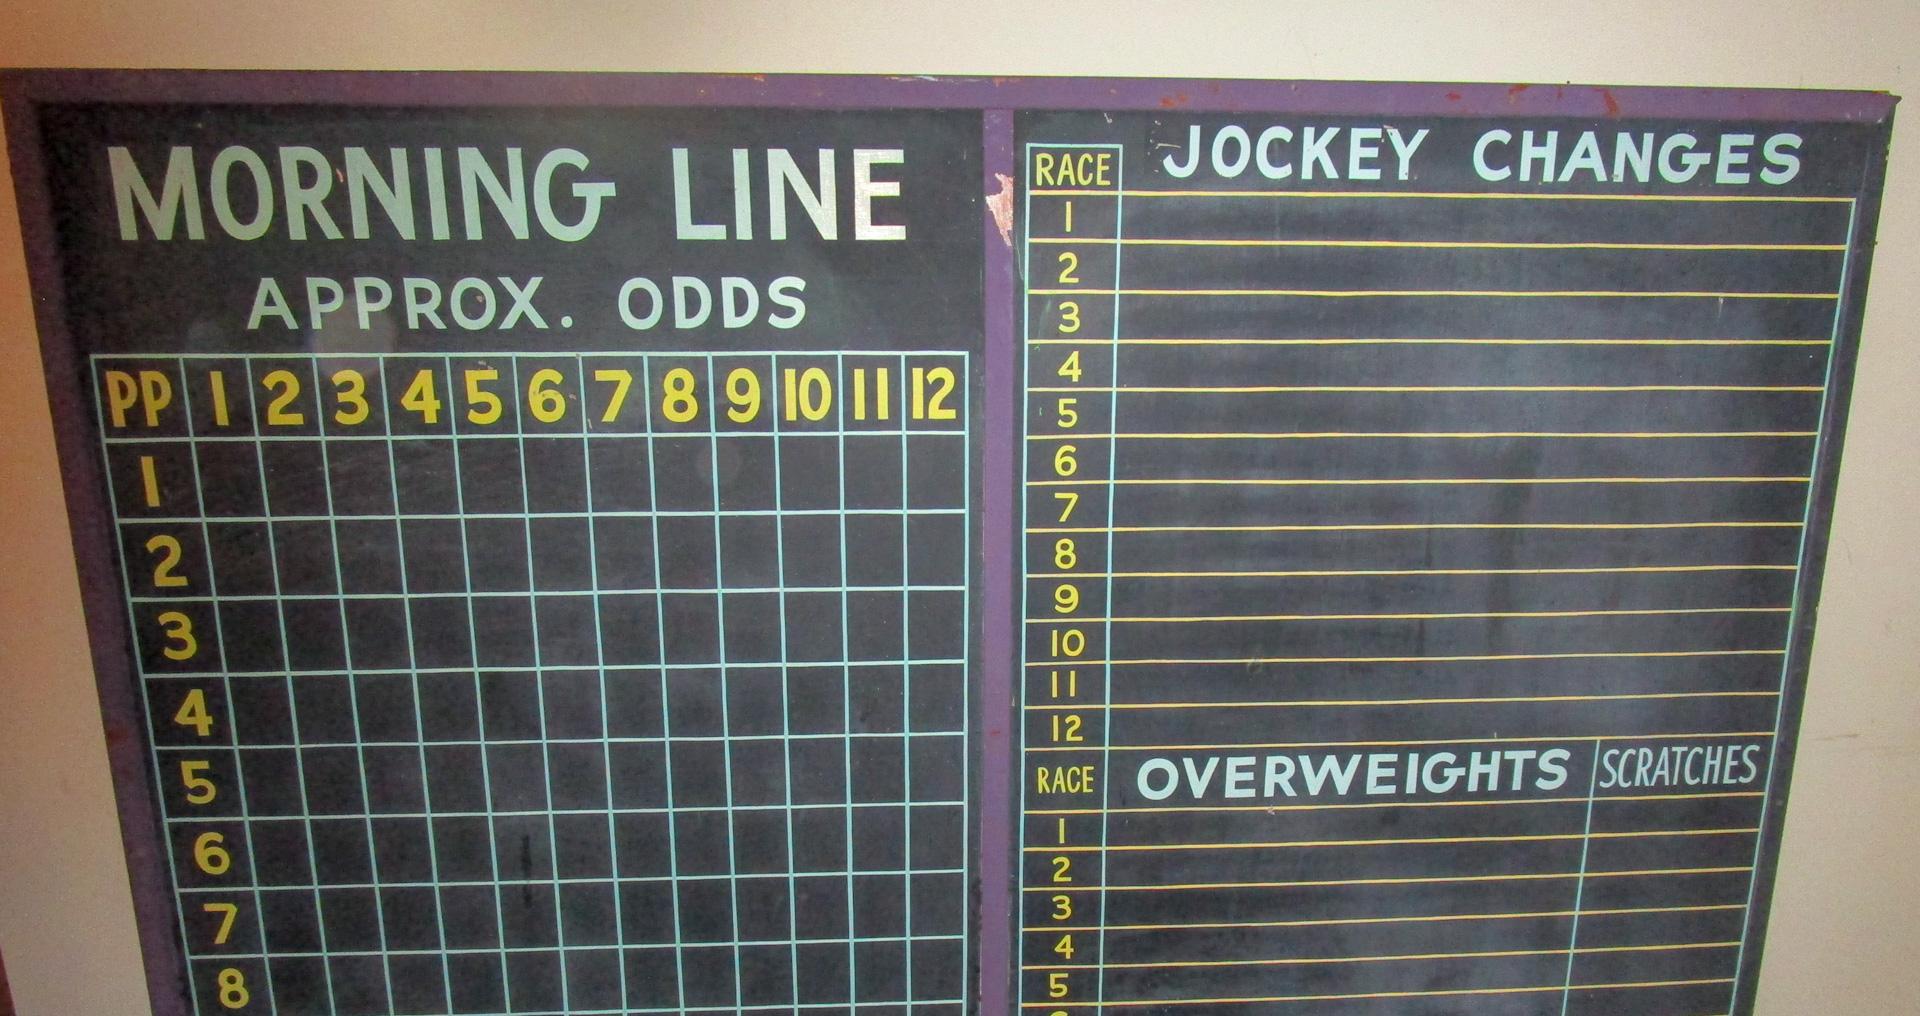 This very large horse racing slate chalk board calculates the morning line up with the approximate odds, jockey changes, overweights and scratches for twelve races. Framed in a painted purple wooden framework, it is the perfect addition to your game